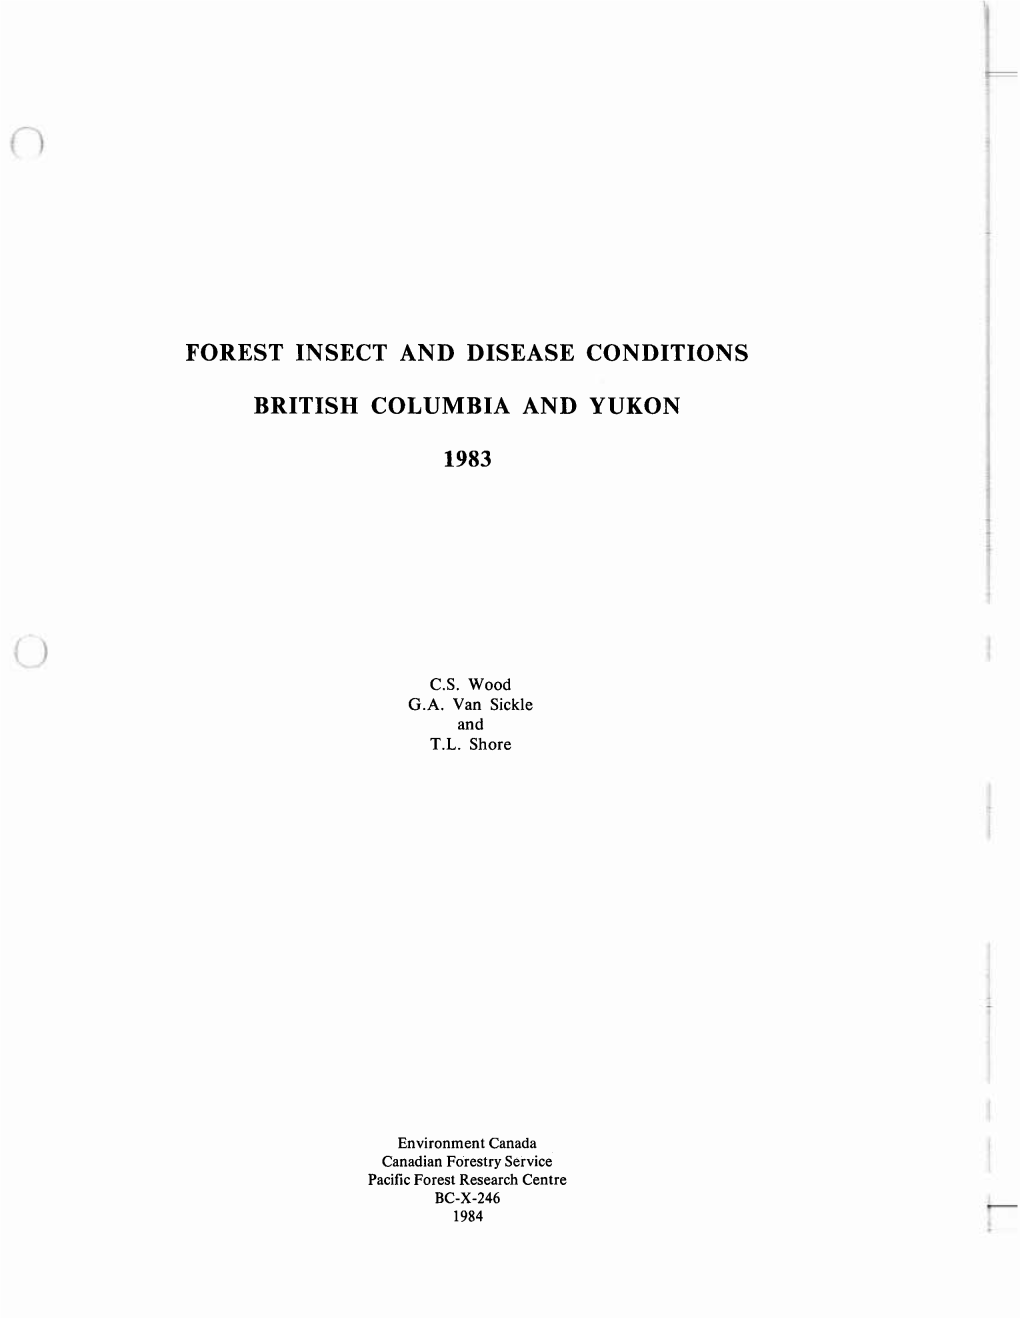 Forest Insect and Disease Conditions British Columbia and Yukon 1983